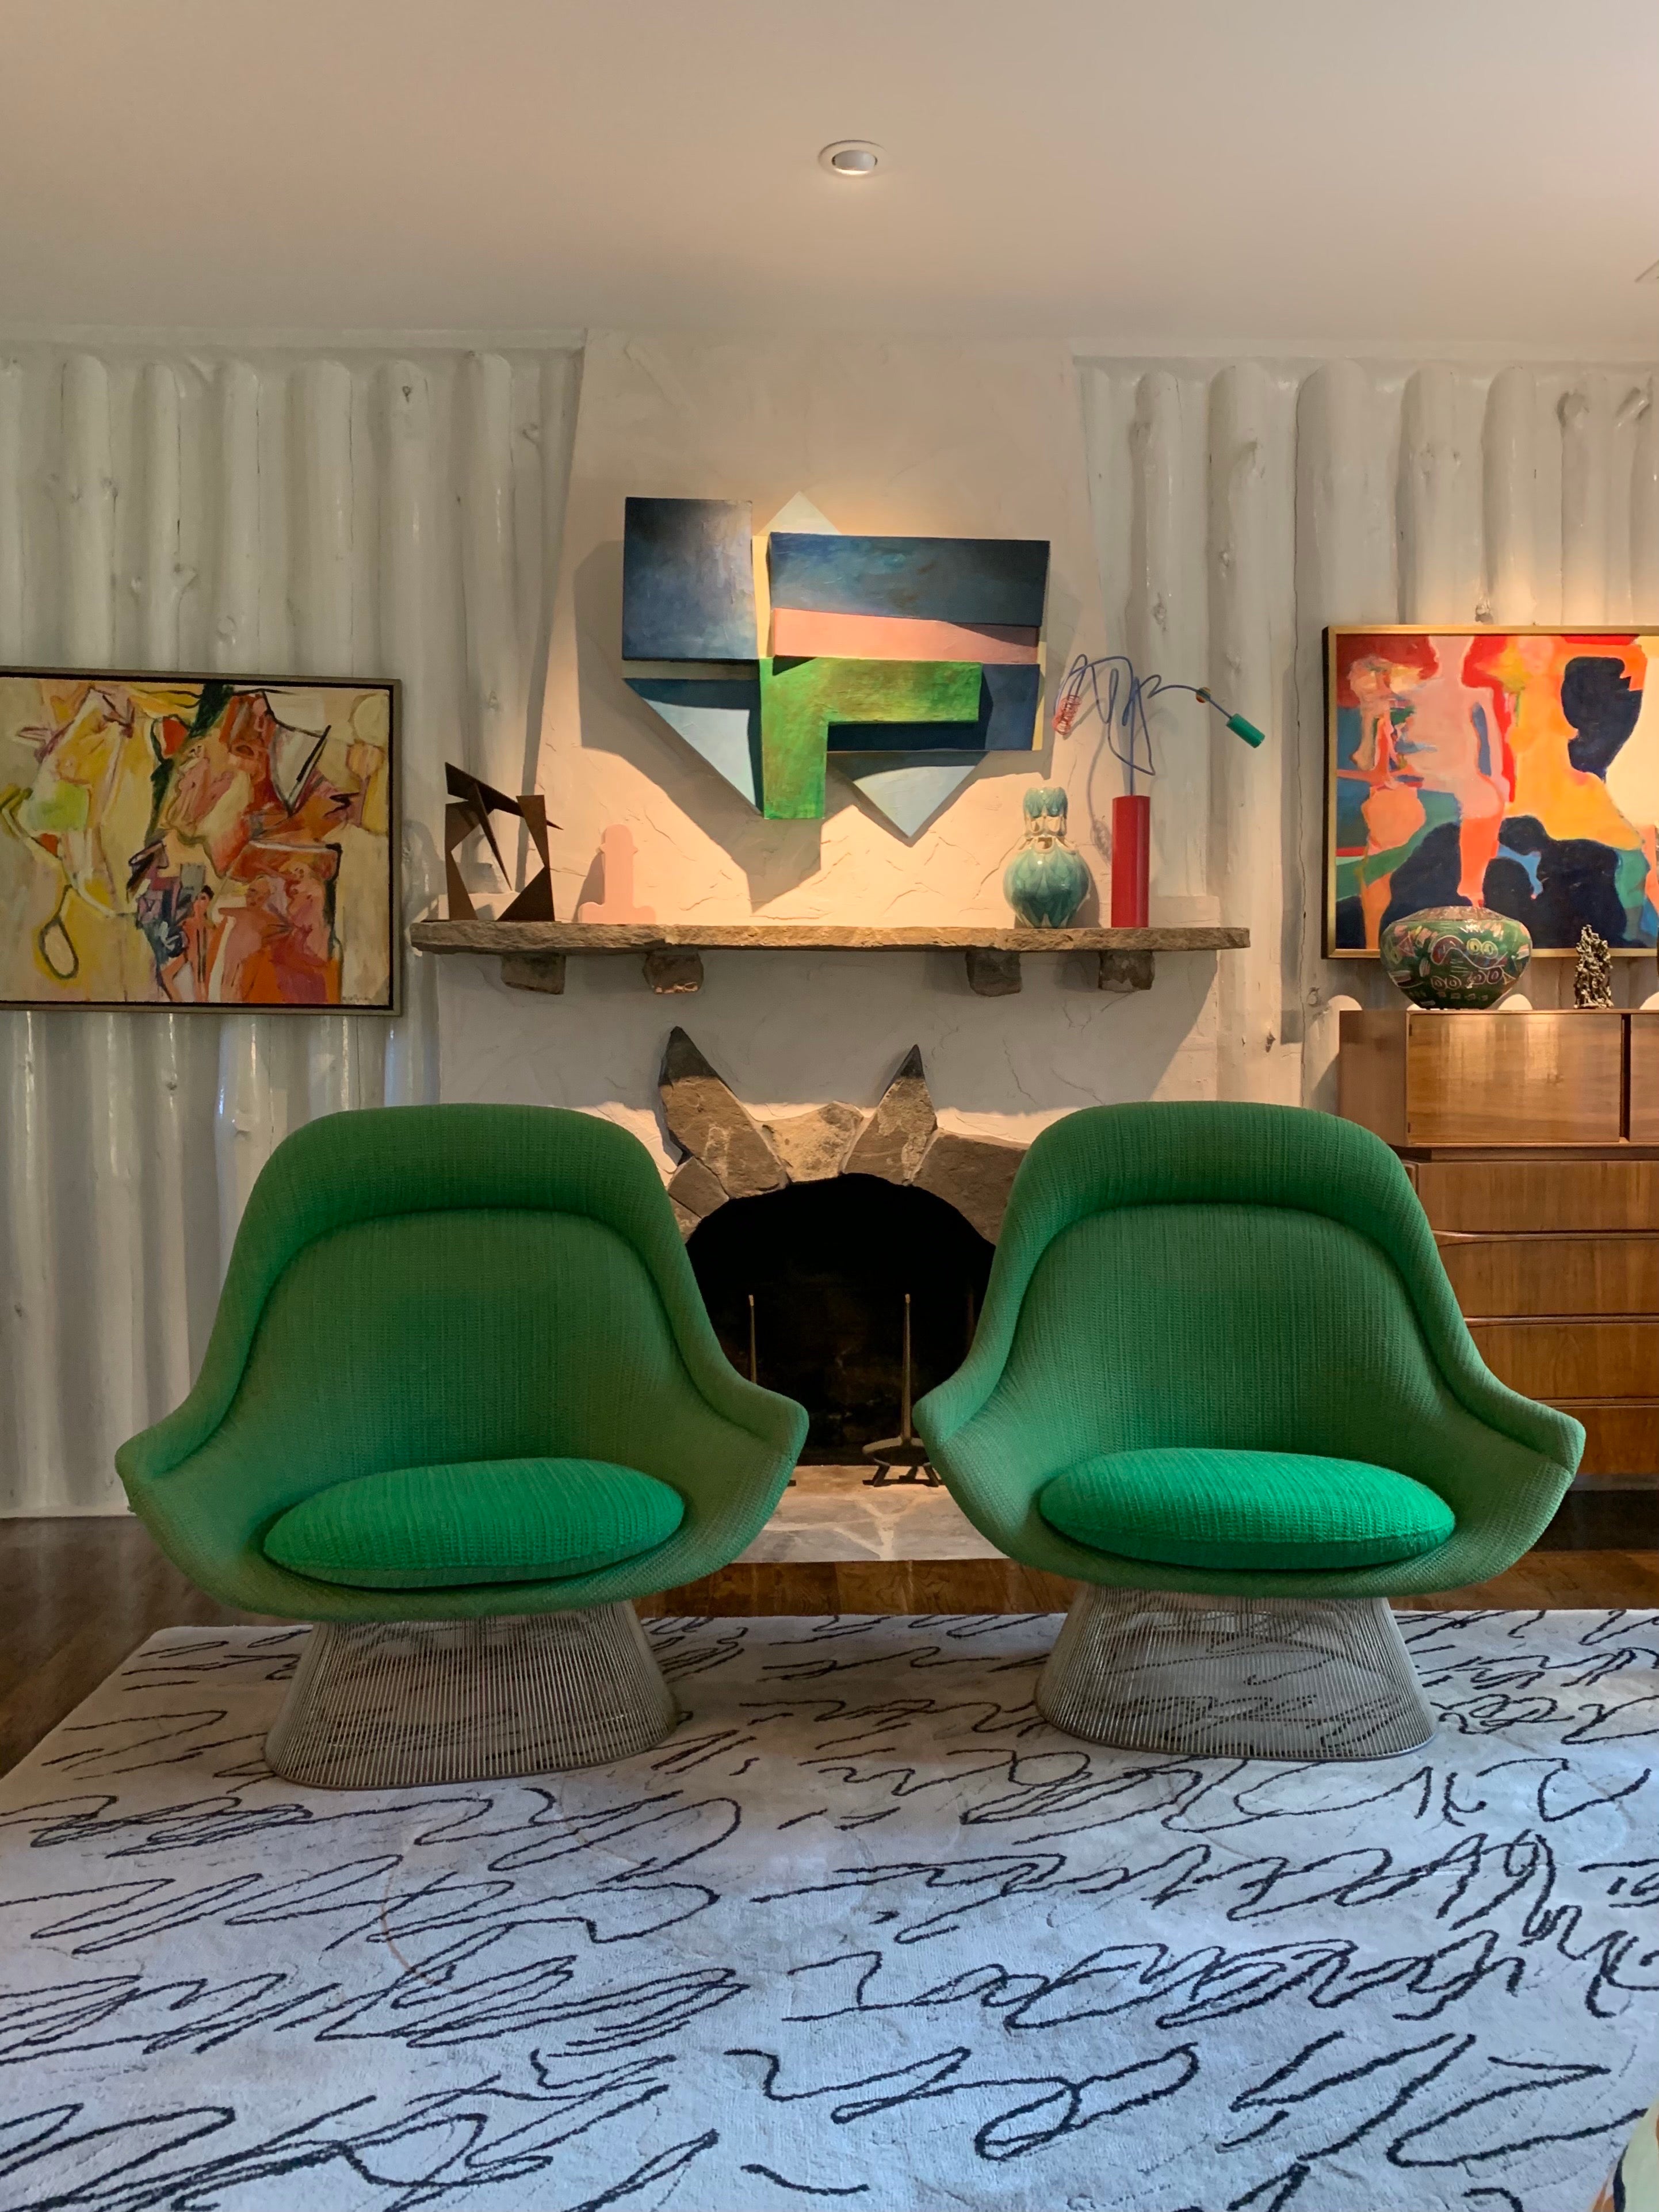 Incredible vintage pair of Easy chairs designed by Warren Platner for Knoll in 1966. Chairs feature the welded curved steel bases in the original bold kelly green textured upholstery. Beautiful combination!